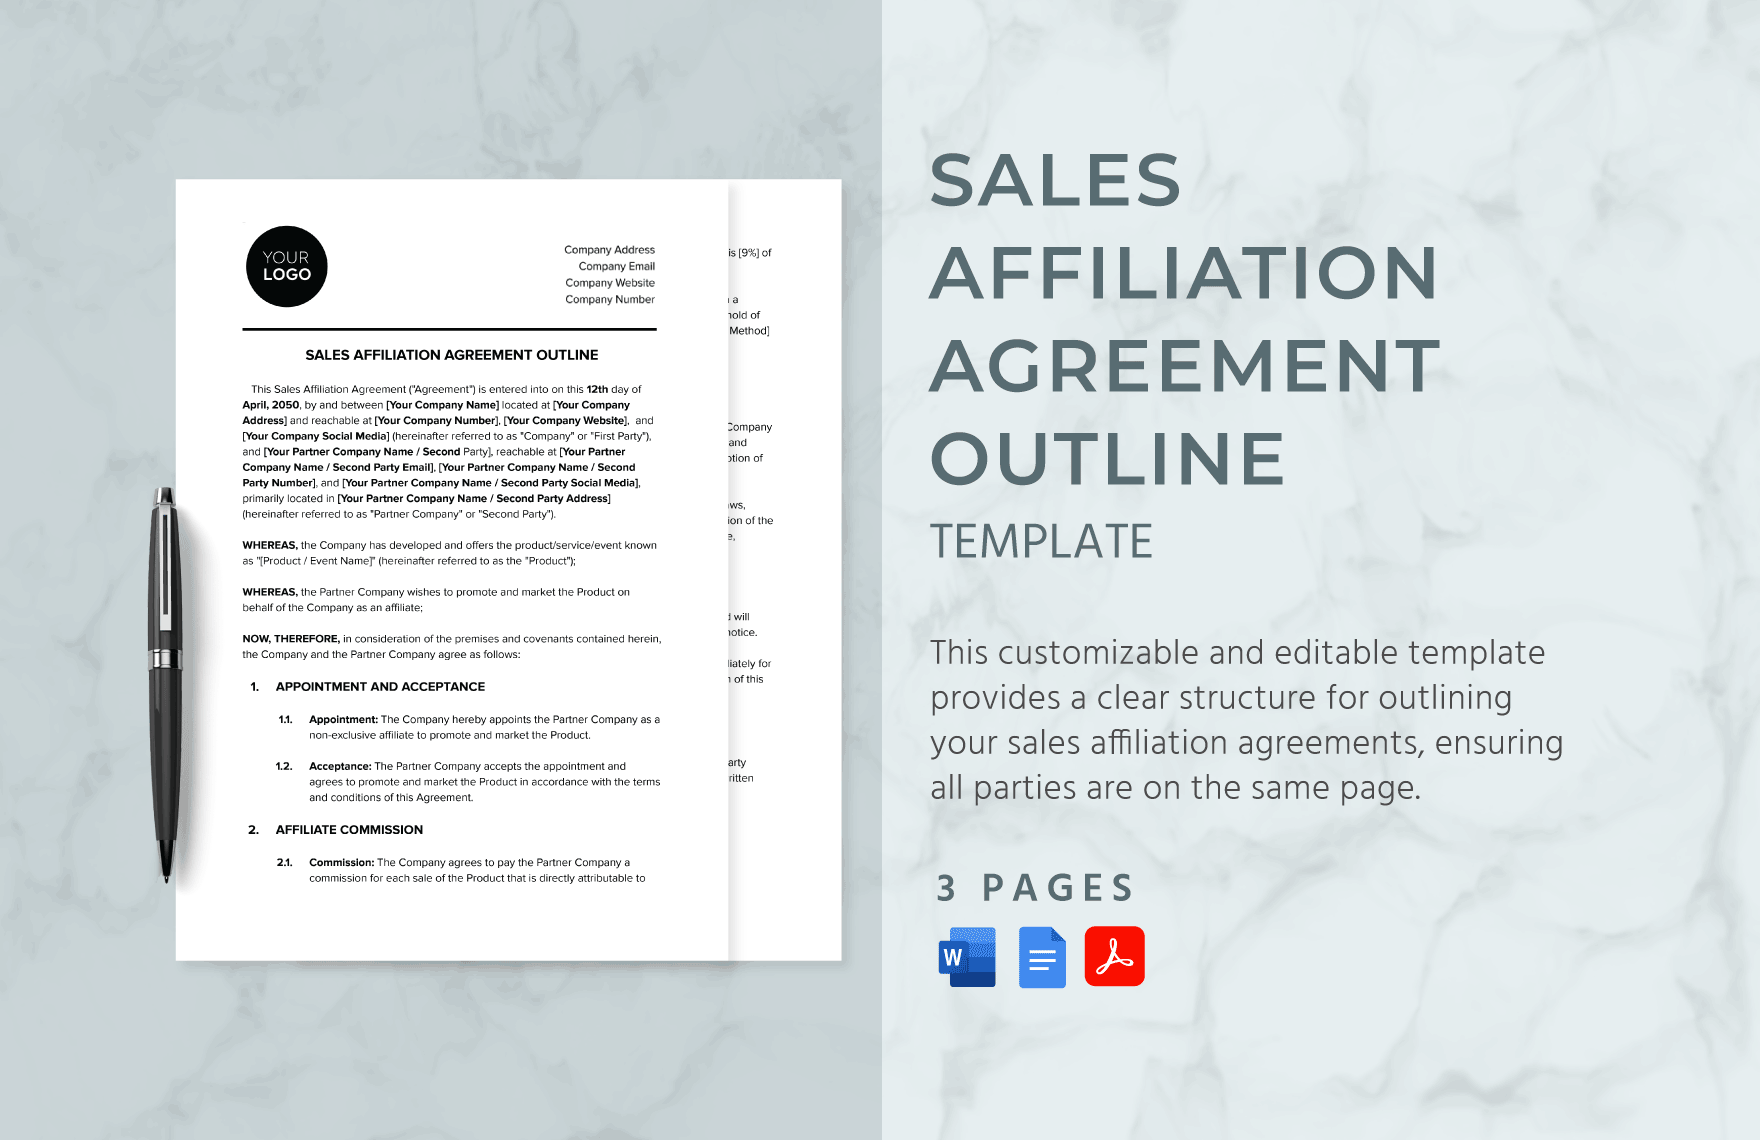 Sales Affiliation Agreement Outline Template